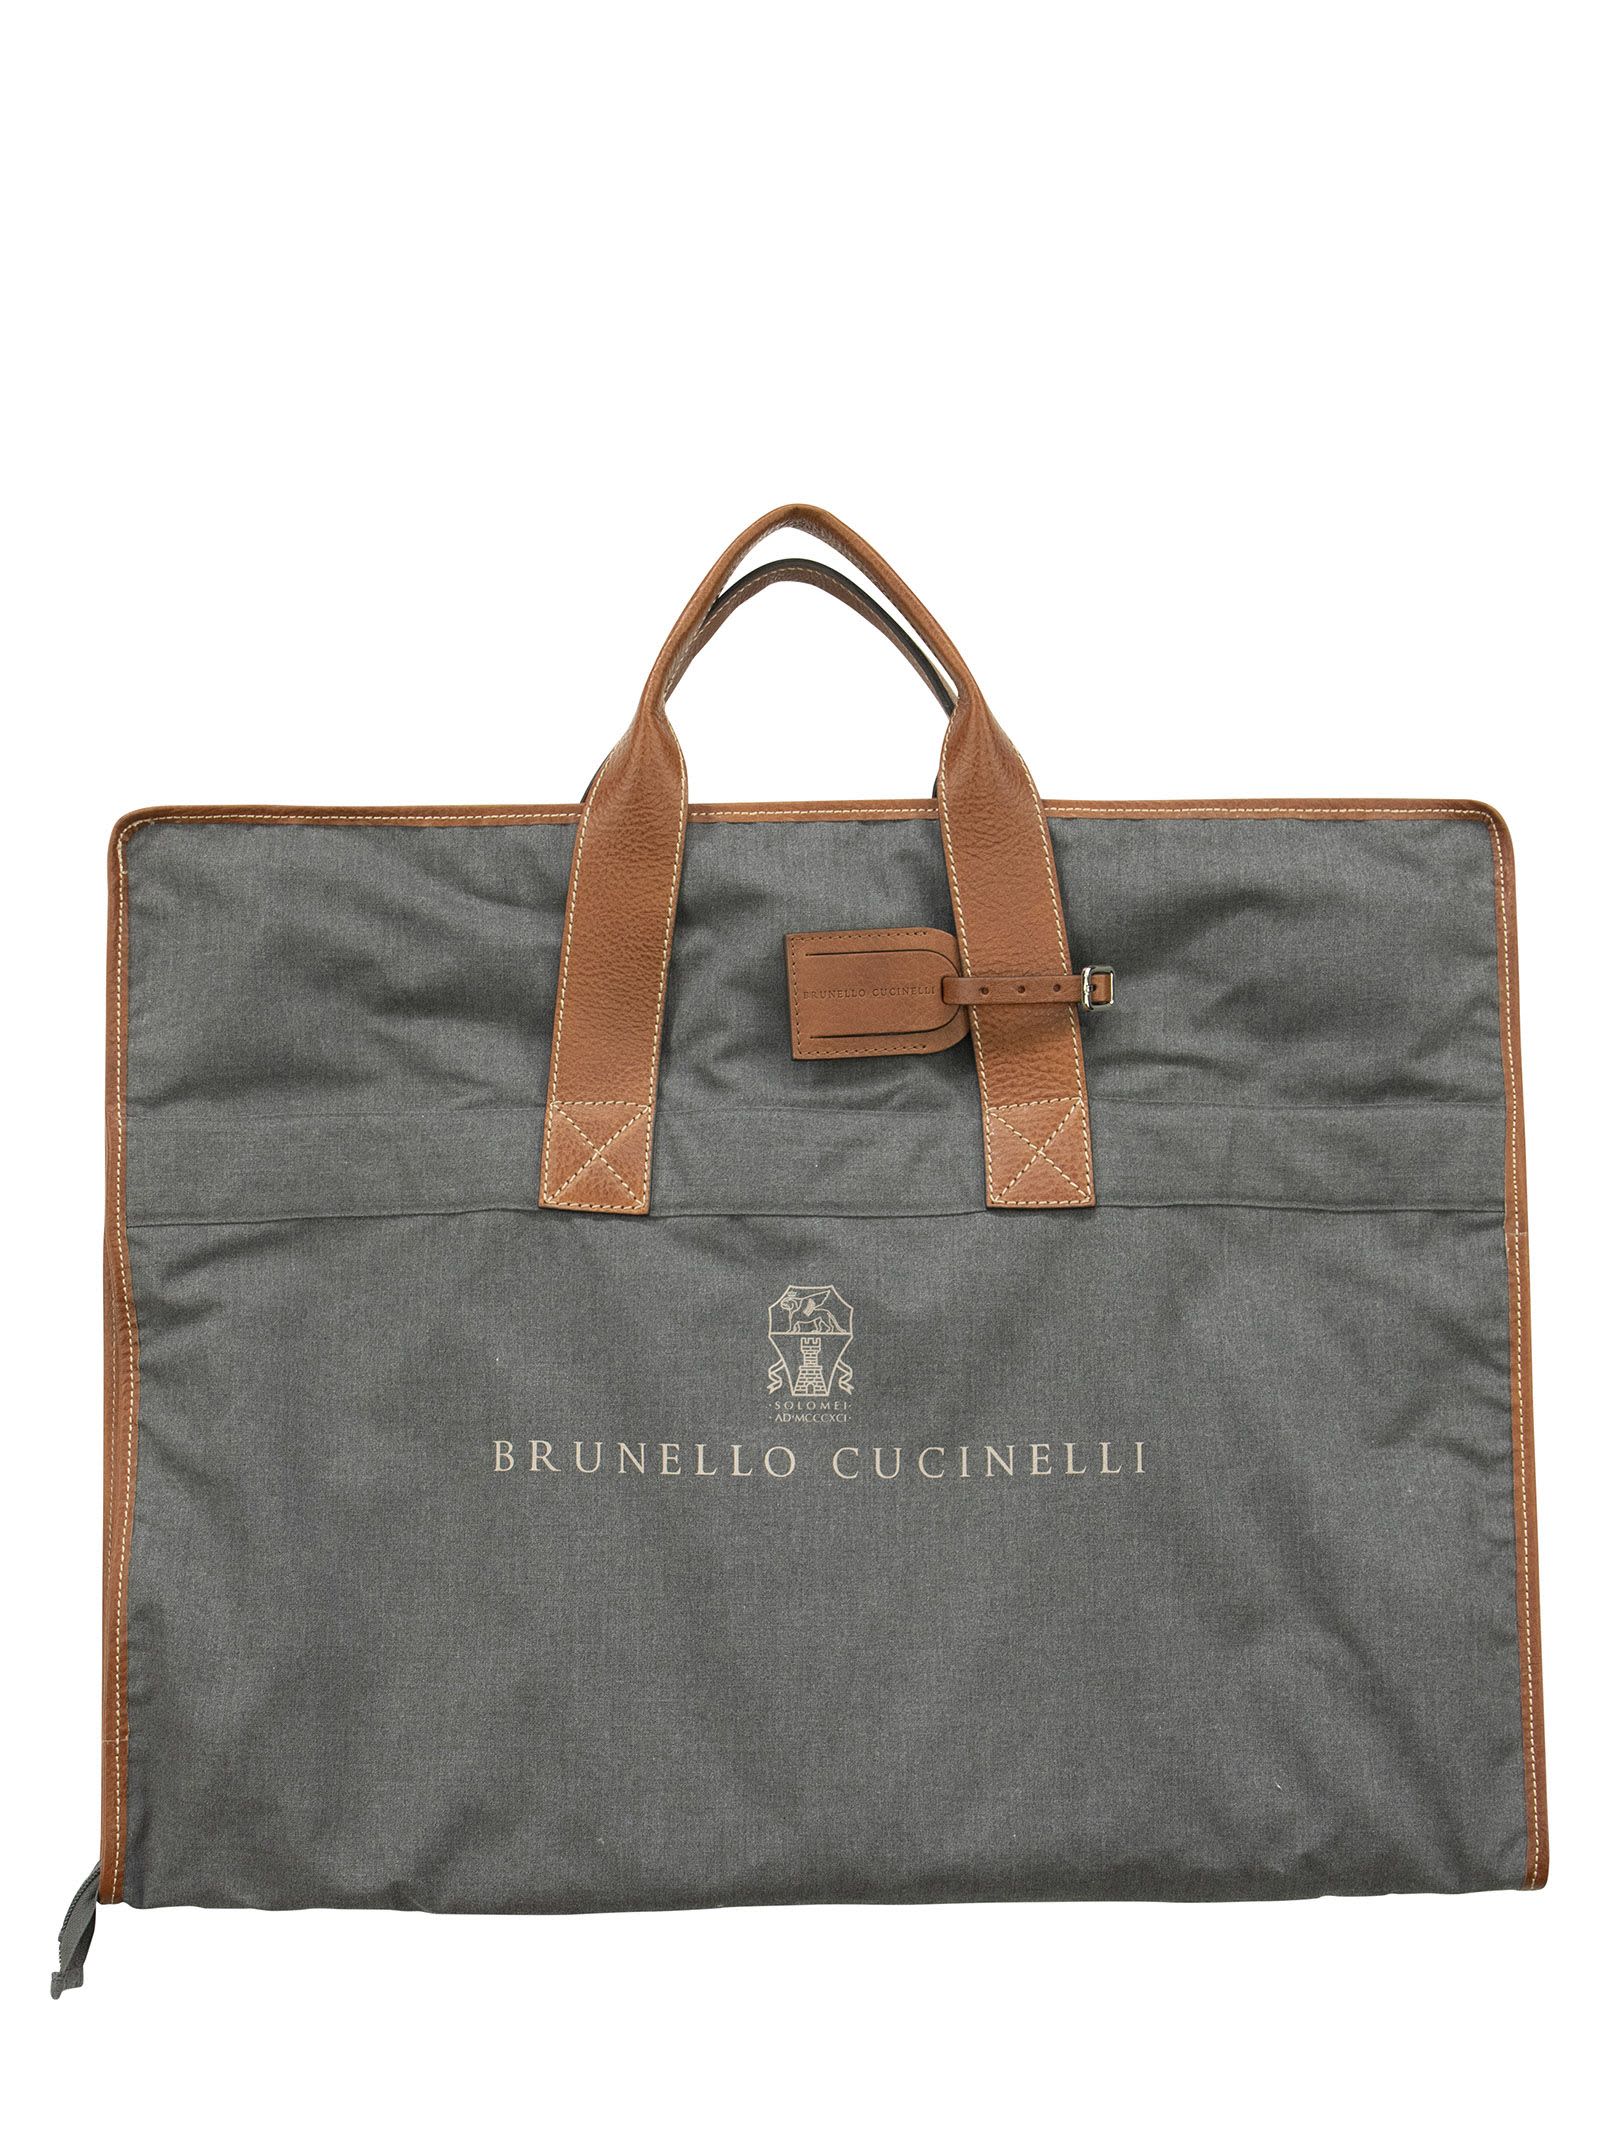 BRUNELLO CUCINELLI COTTON AND LEATHER COVERS